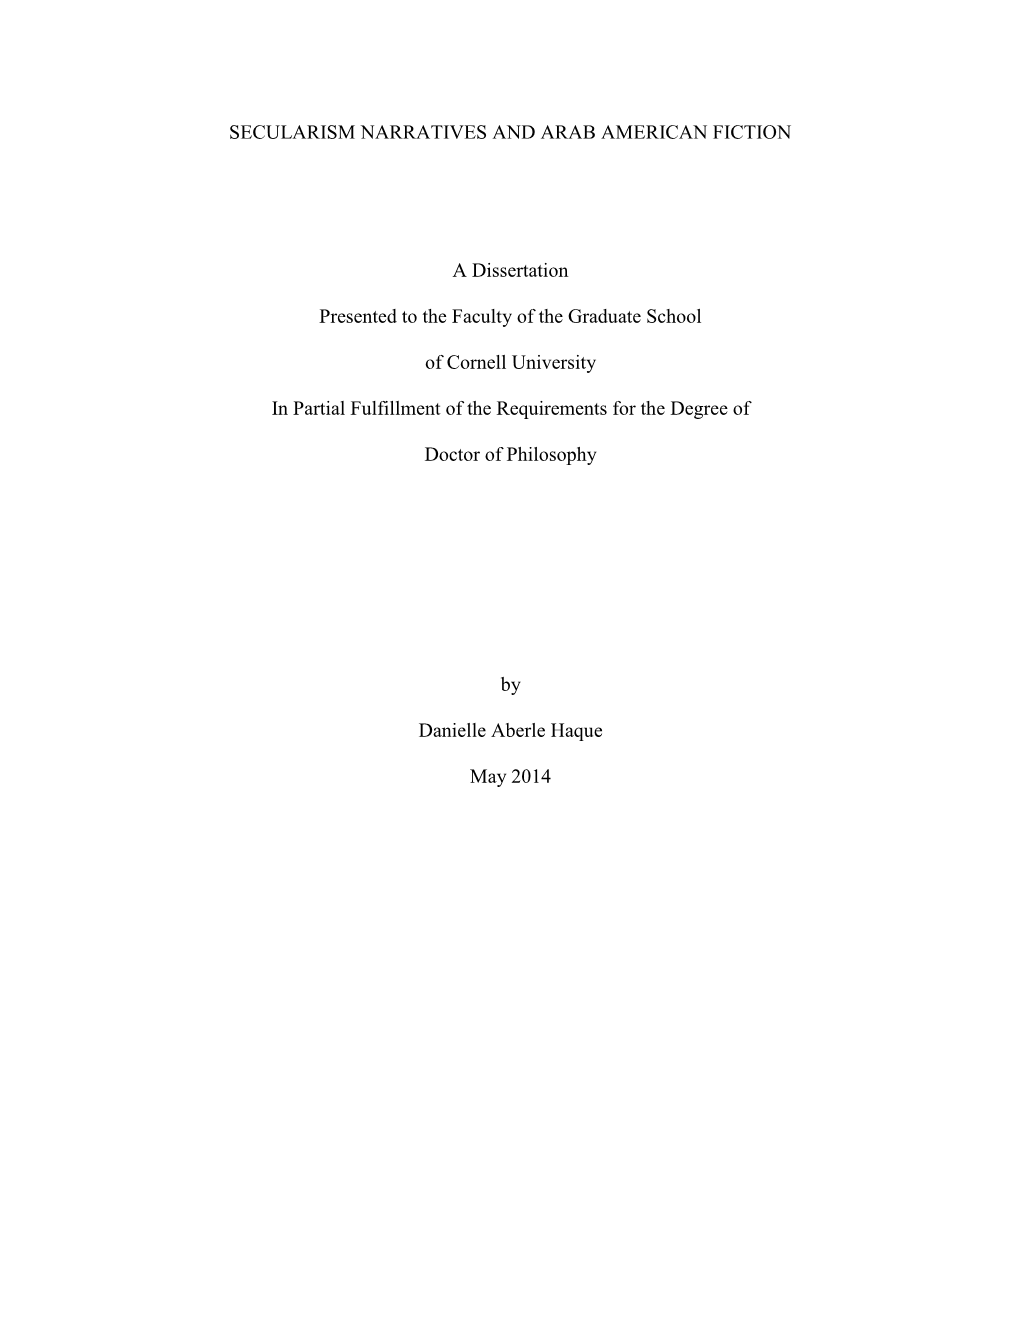 SECULARISM NARRATIVES and ARAB AMERICAN FICTION a Dissertation Presented to the Faculty of the Graduate School of Cornell Univer